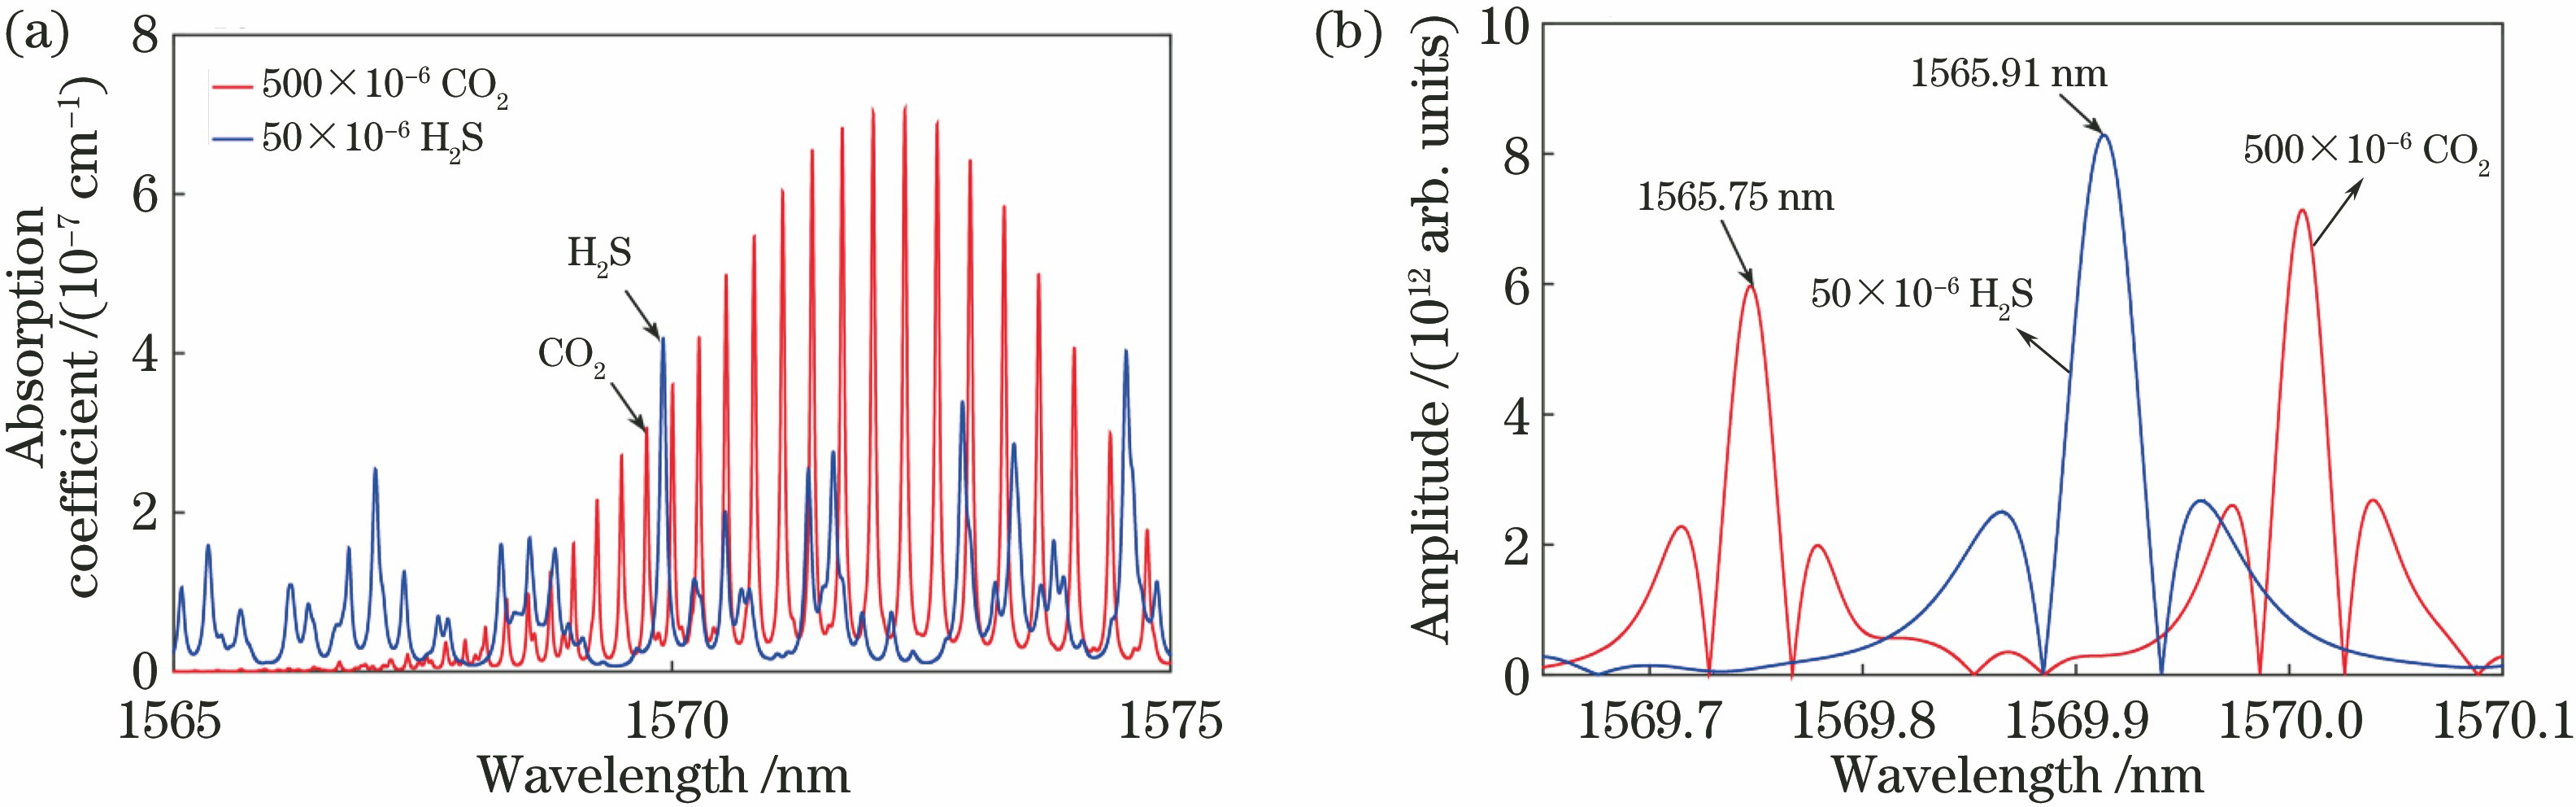 Absorption lines of H2S and CO2 in the near-infrared region and the simulated 2f signals. (a) Absorption lines of H2S and CO2 in the near-infrared region; (b) simulated 2f signals of H2S and CO2